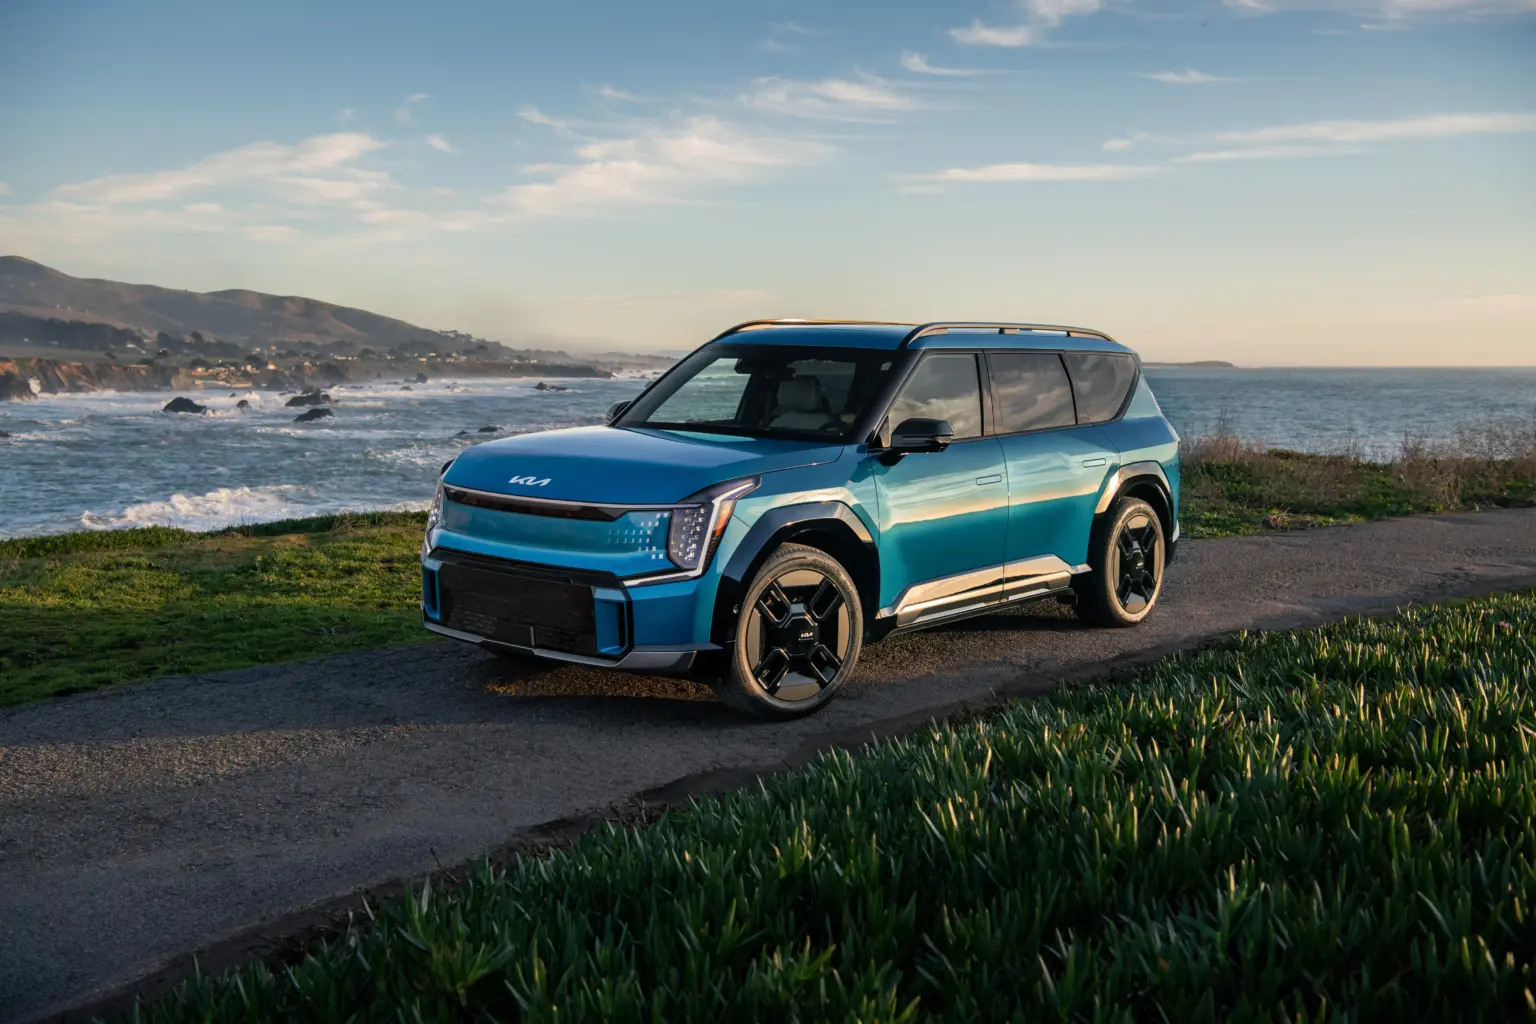 Kia’s all electric three-row SUV - EV9 has been recognized as winner of the World’s Best Car for 2024 by the Women’s Worldwide Car of the Year (WWCOTY)